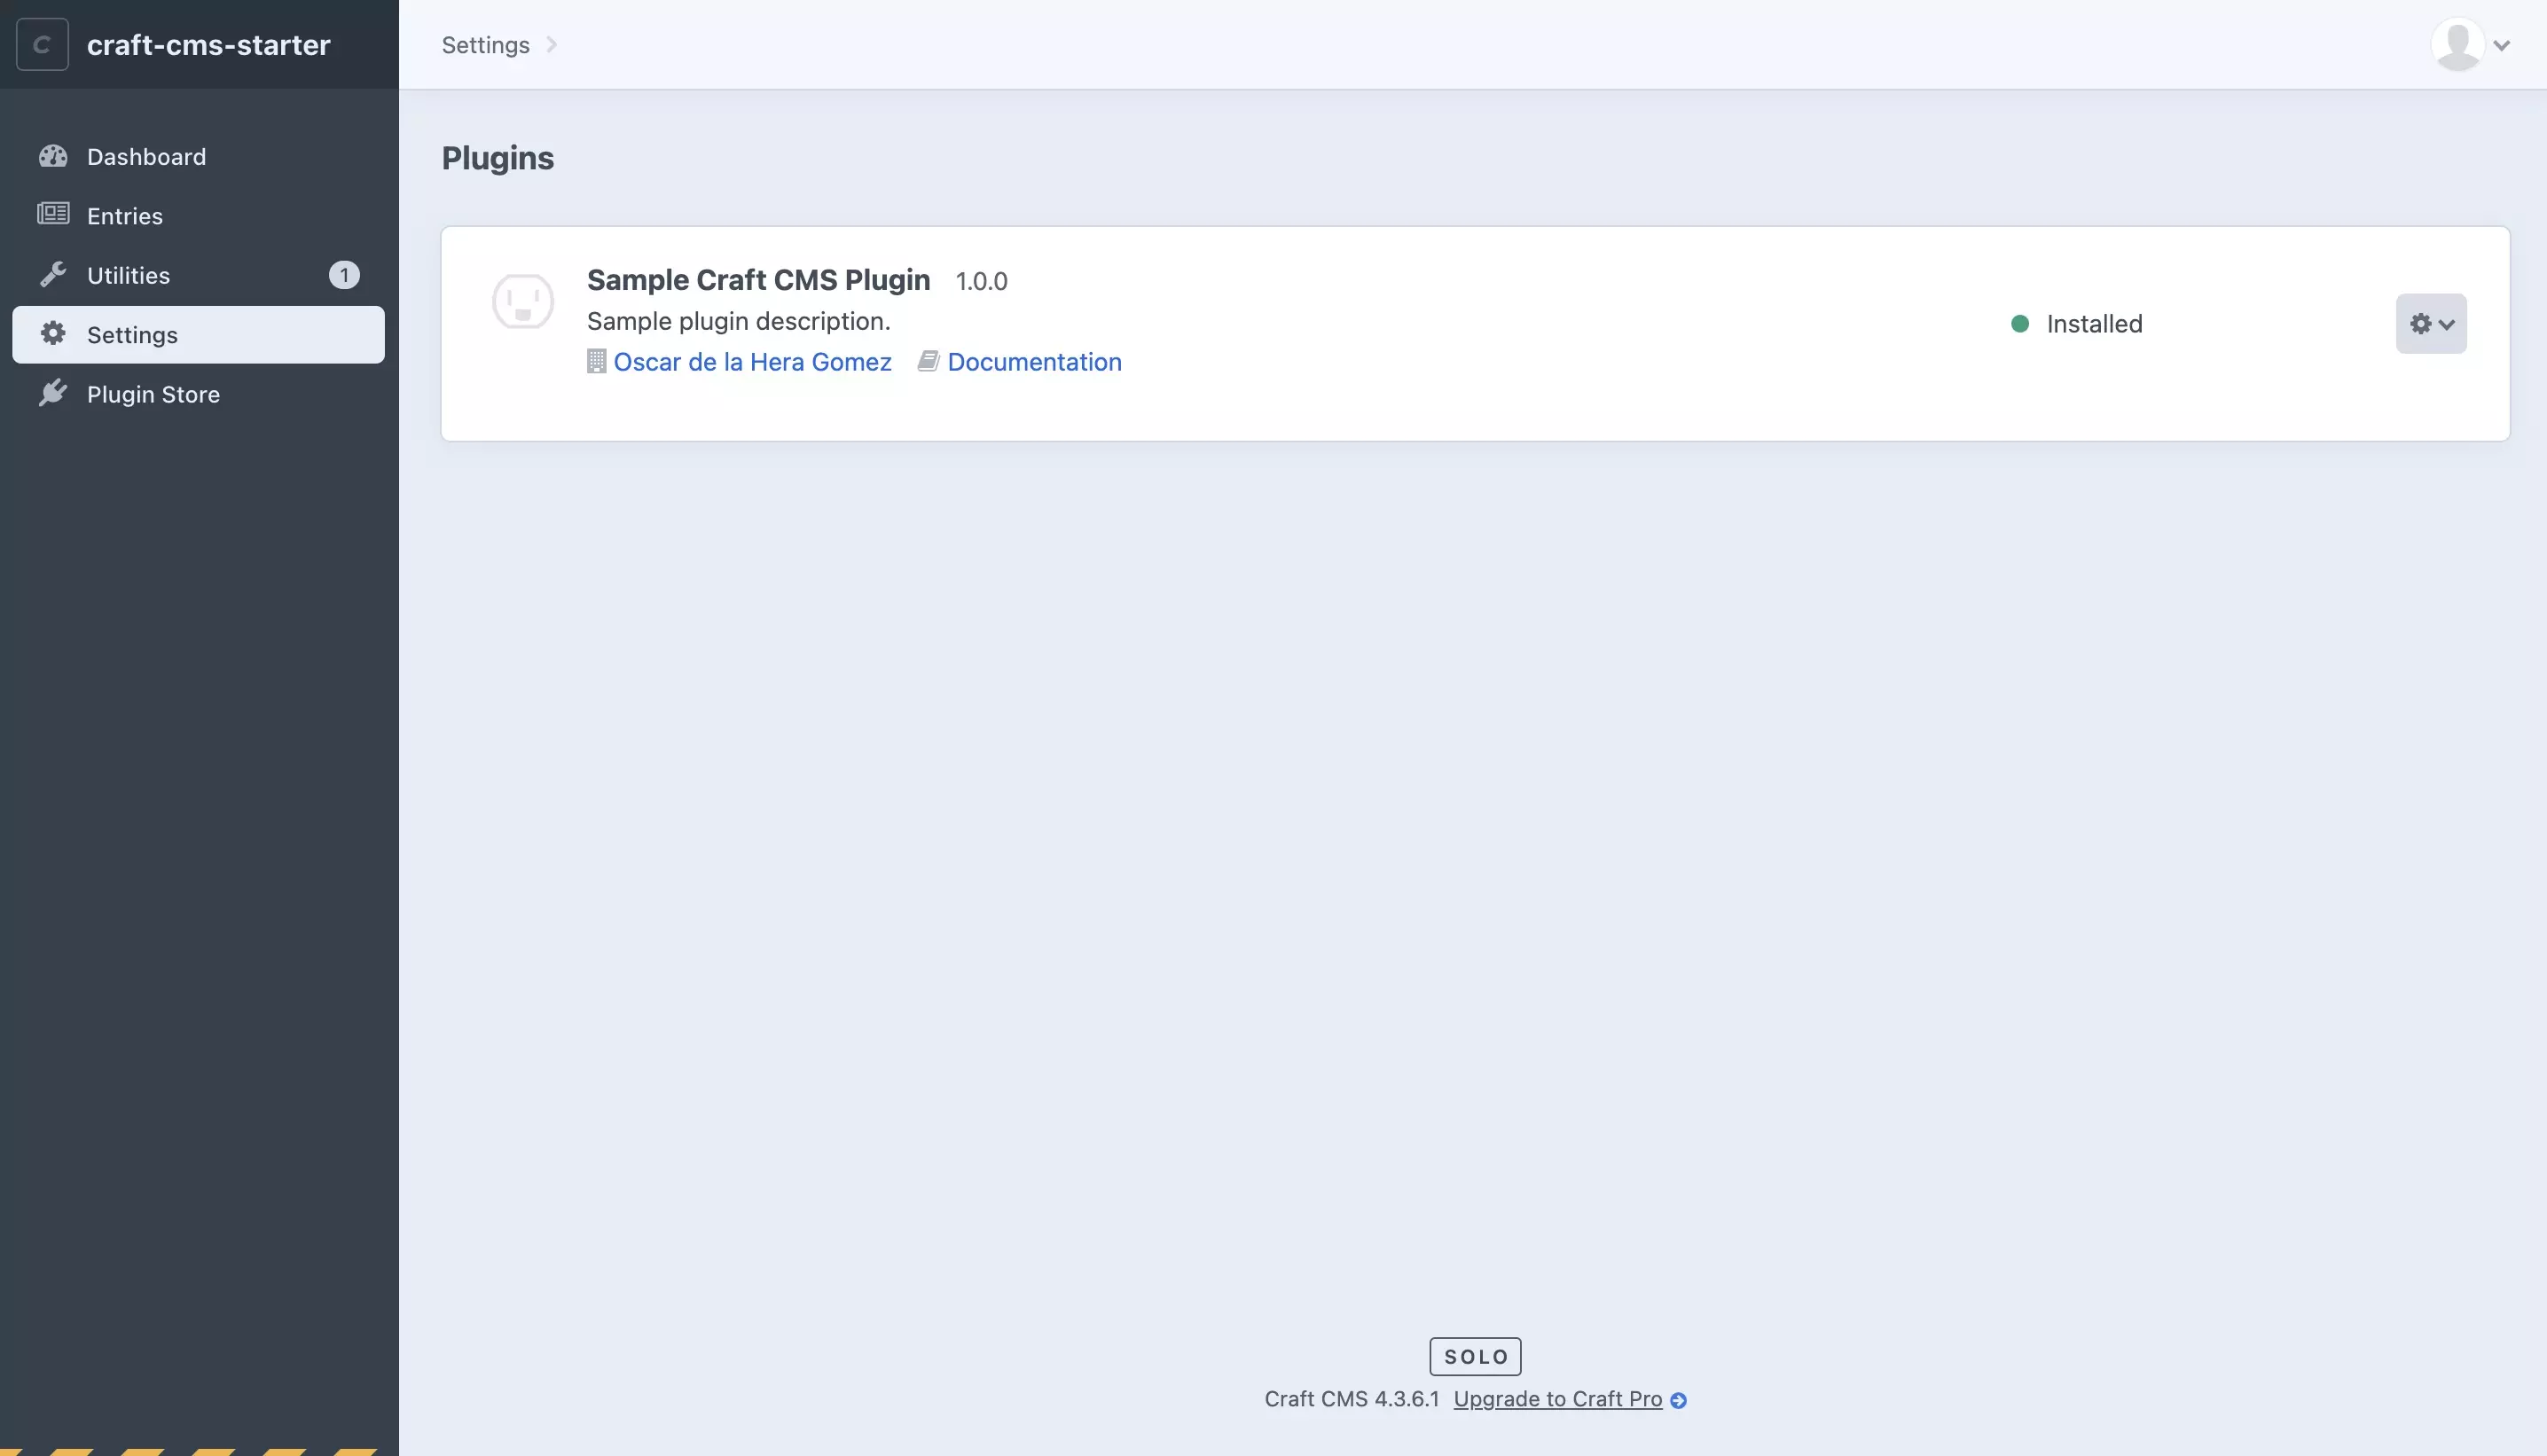 A screenshot of Craft CMS with our plugin title and description updated.